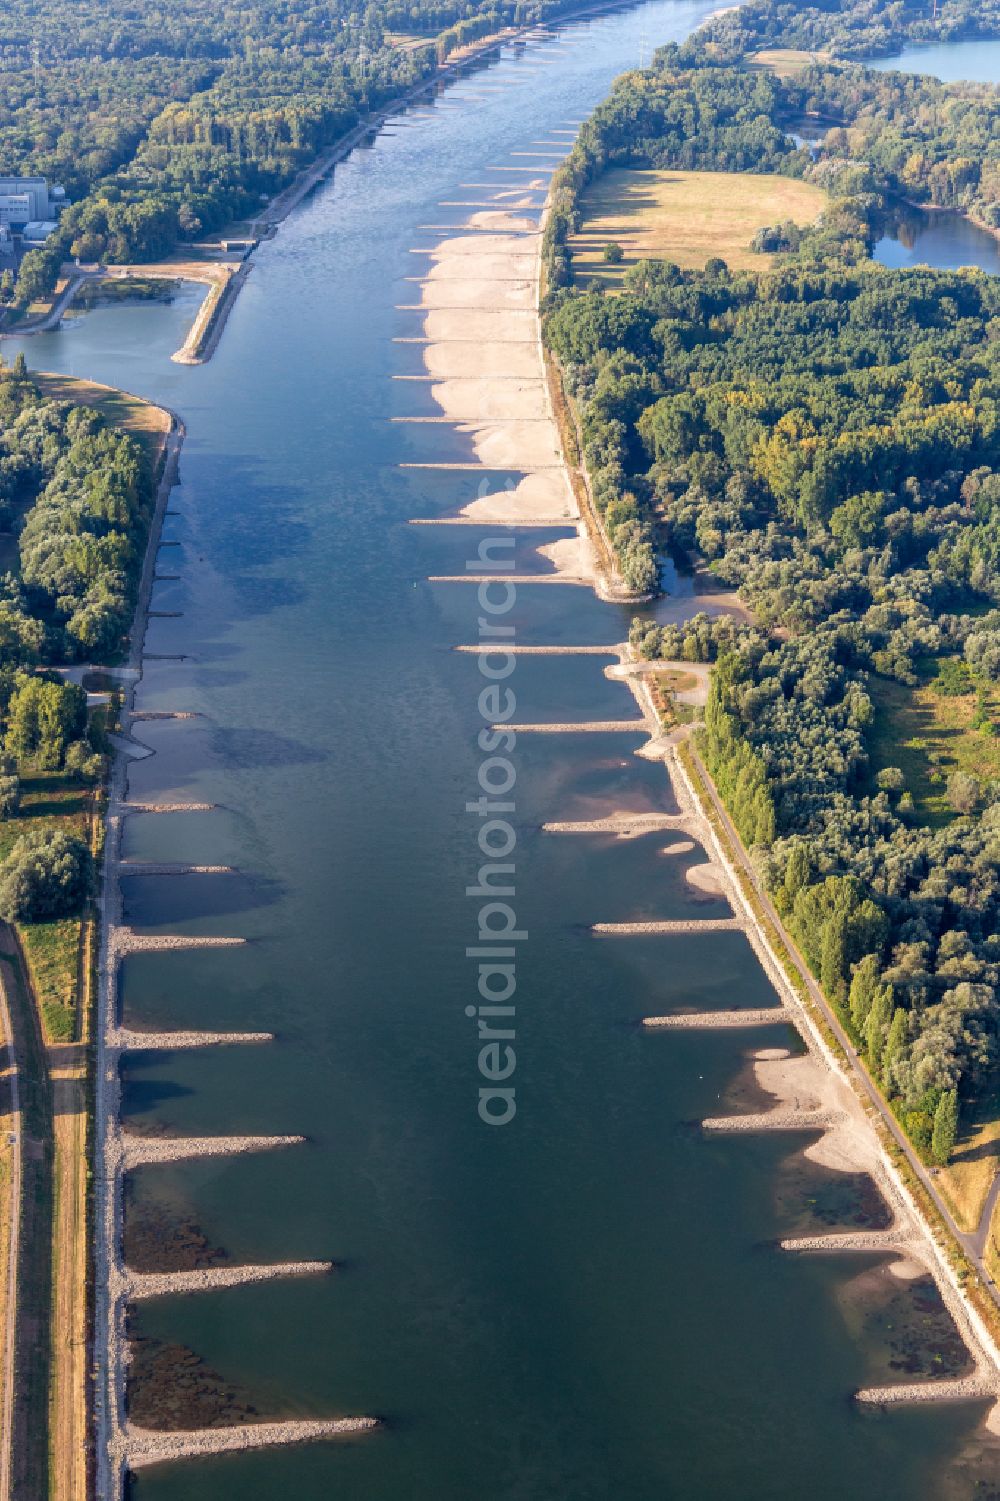 Karlsruhe from the bird's eye view: Groyne head of the of the Rhine river - river course in the district Daxlanden in Karlsruhe in the state Baden-Wuerttemberg, Germany